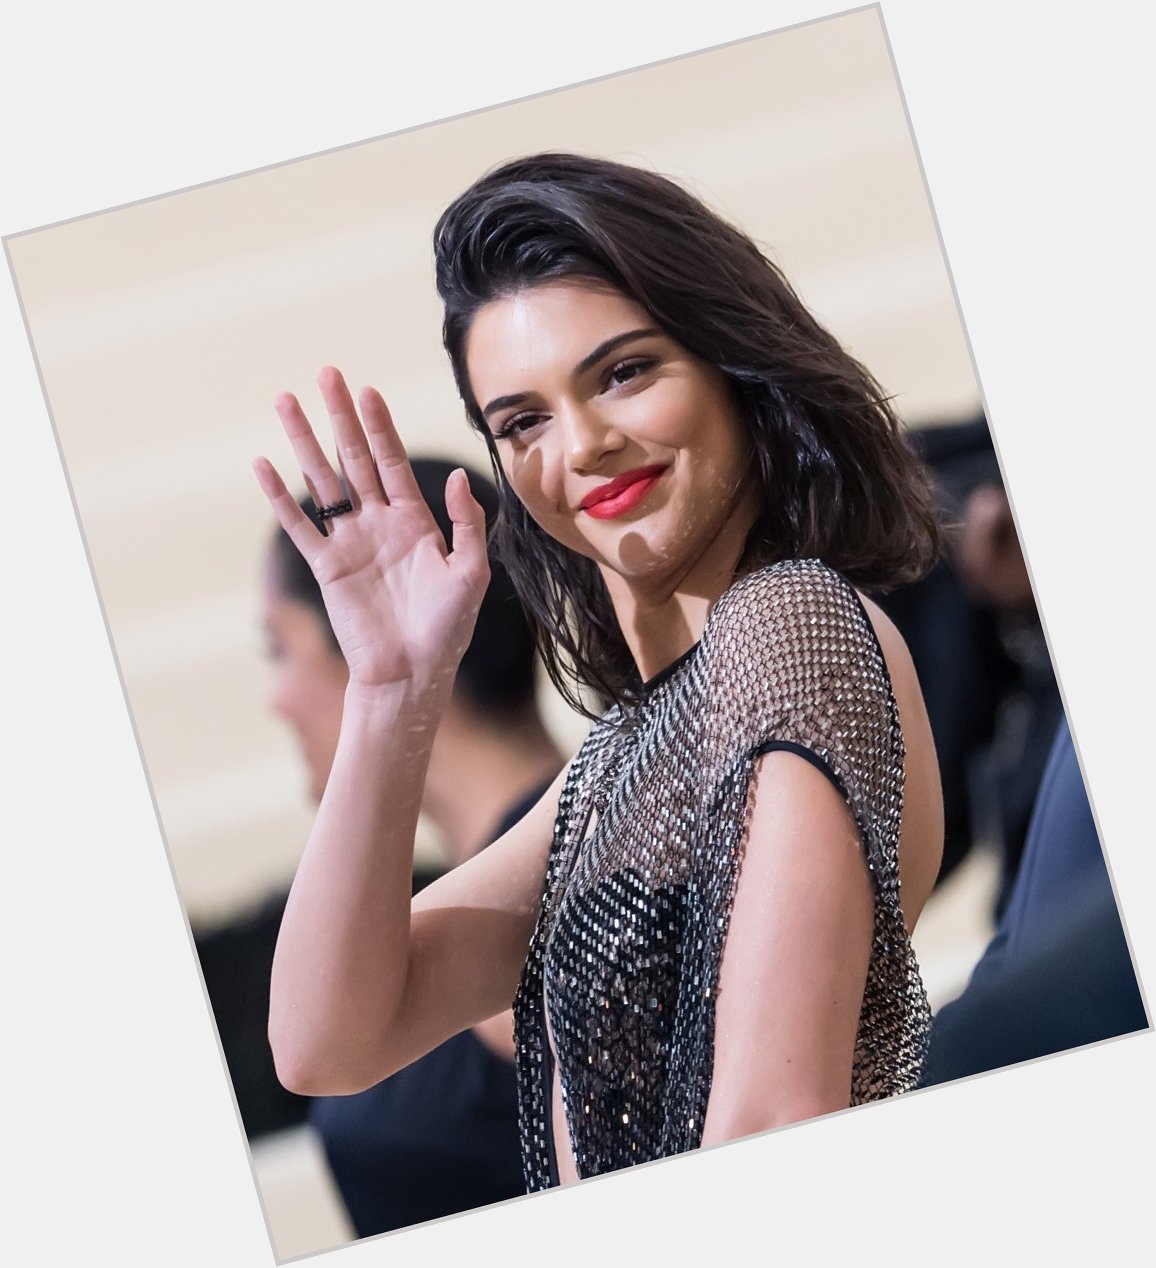 Happy Birthday to Kendall Jenner   About:  